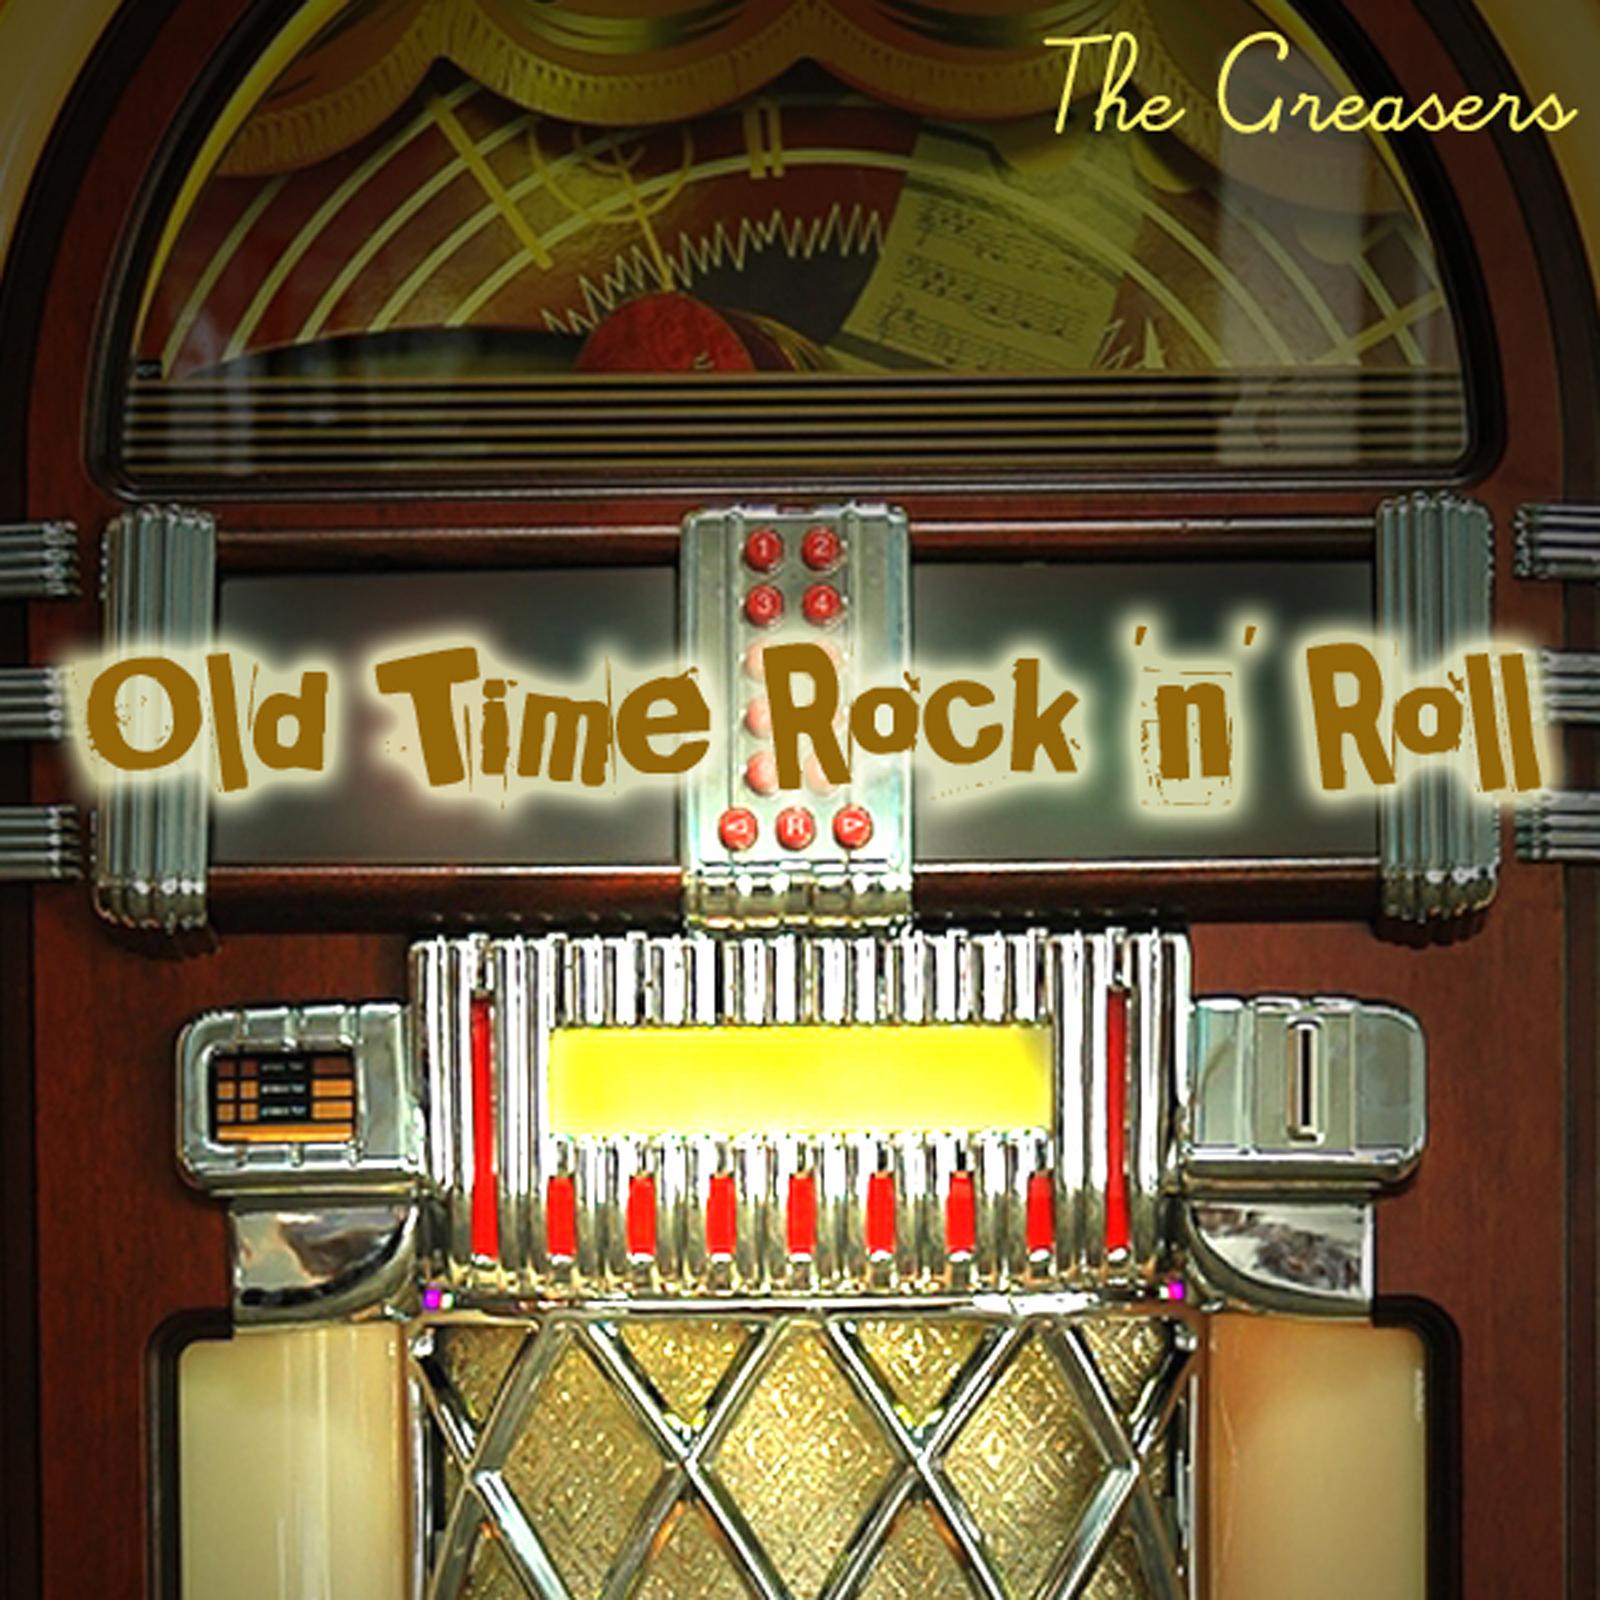 Old Time Rock 'n' Roll